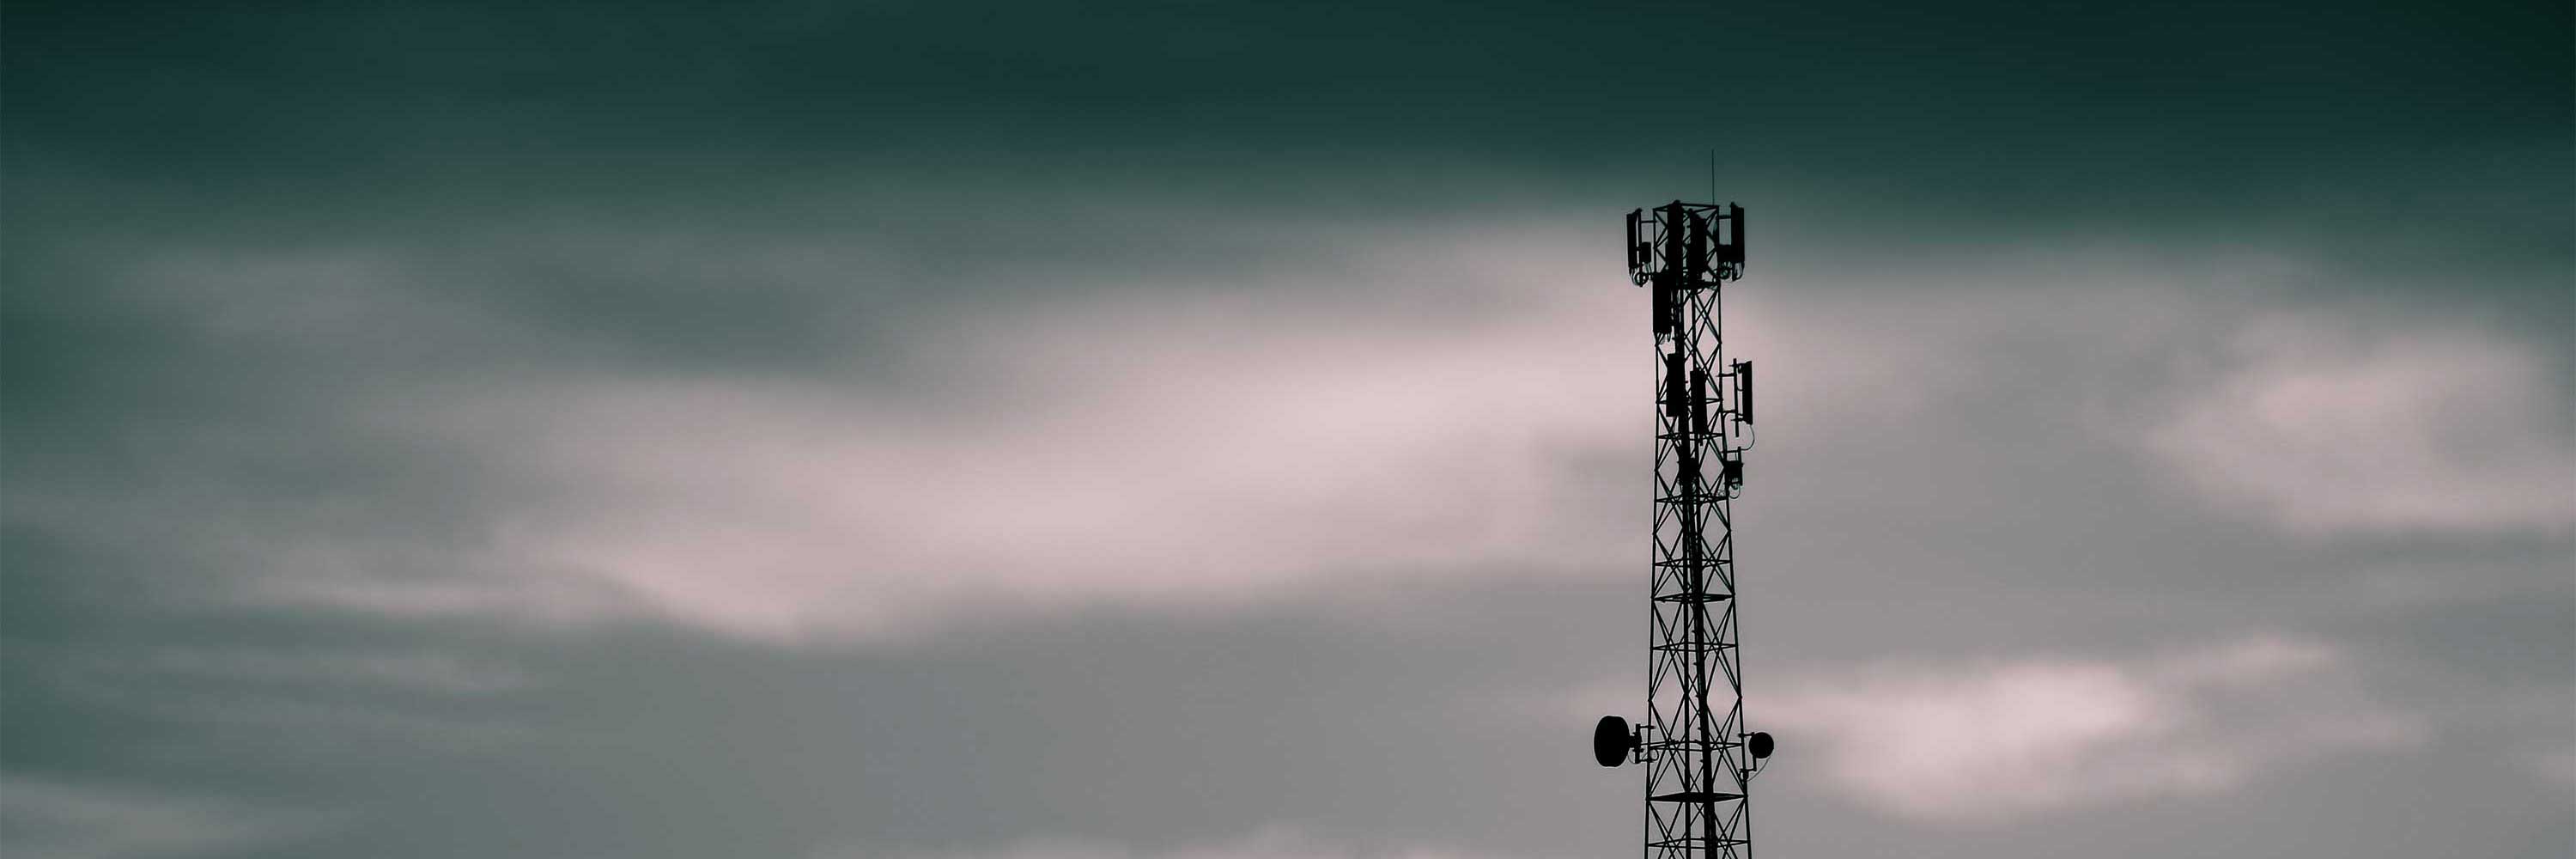 A photo of a cell phone tower